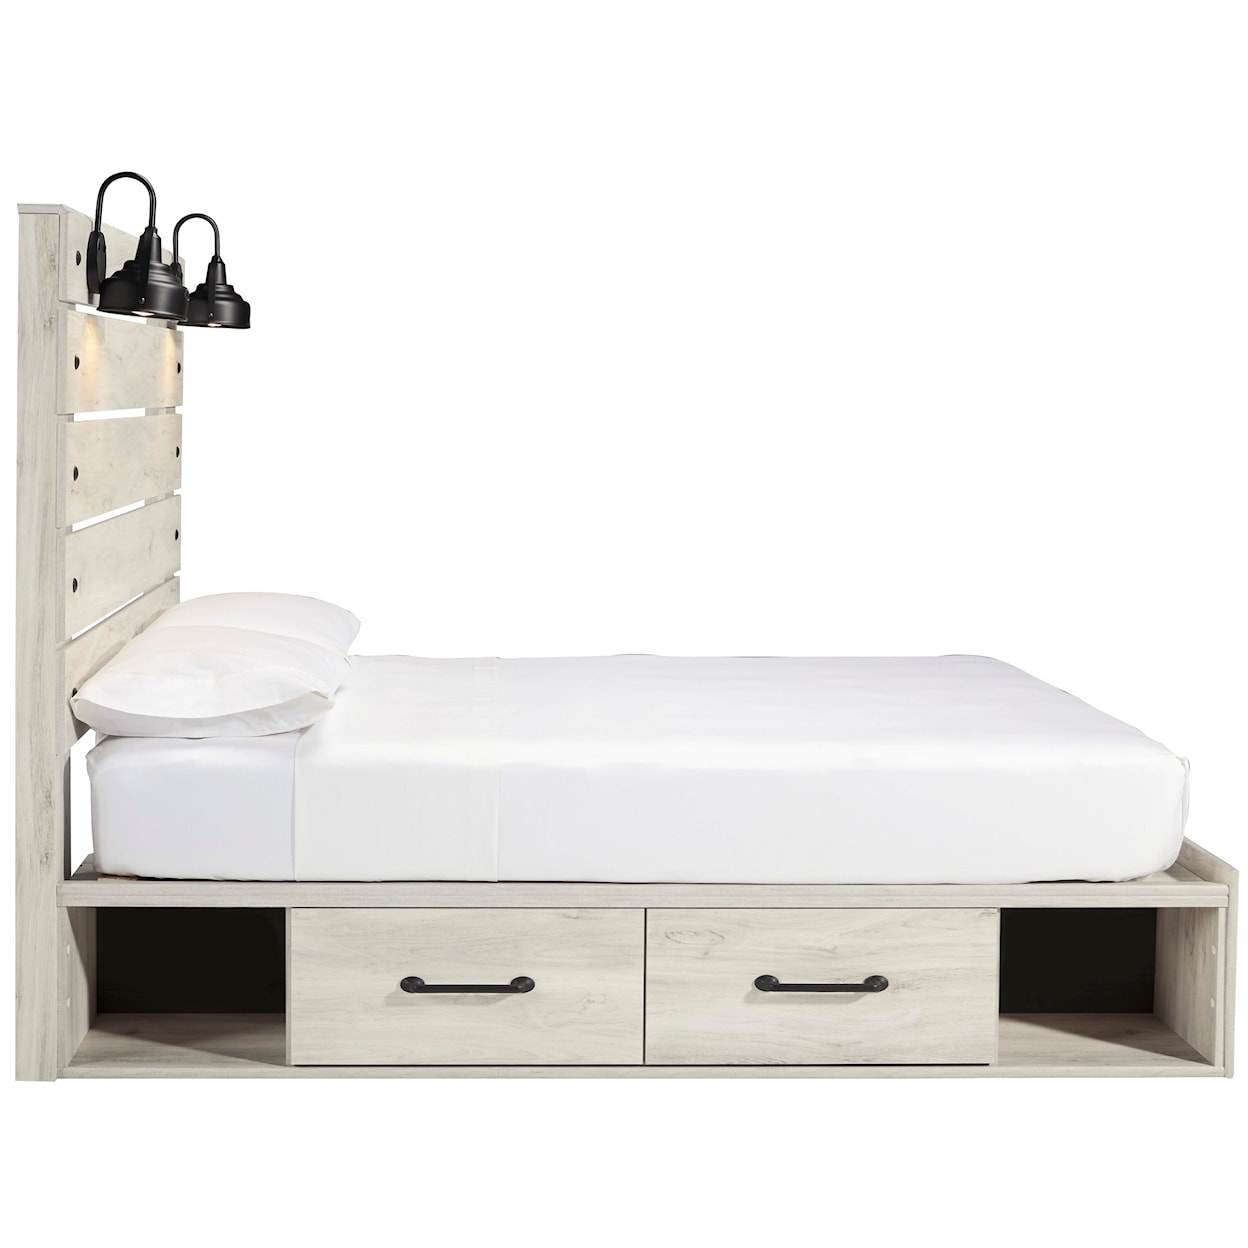 Signature Design by Ashley Cambeck Queen Storage Bed with 4 Drawers